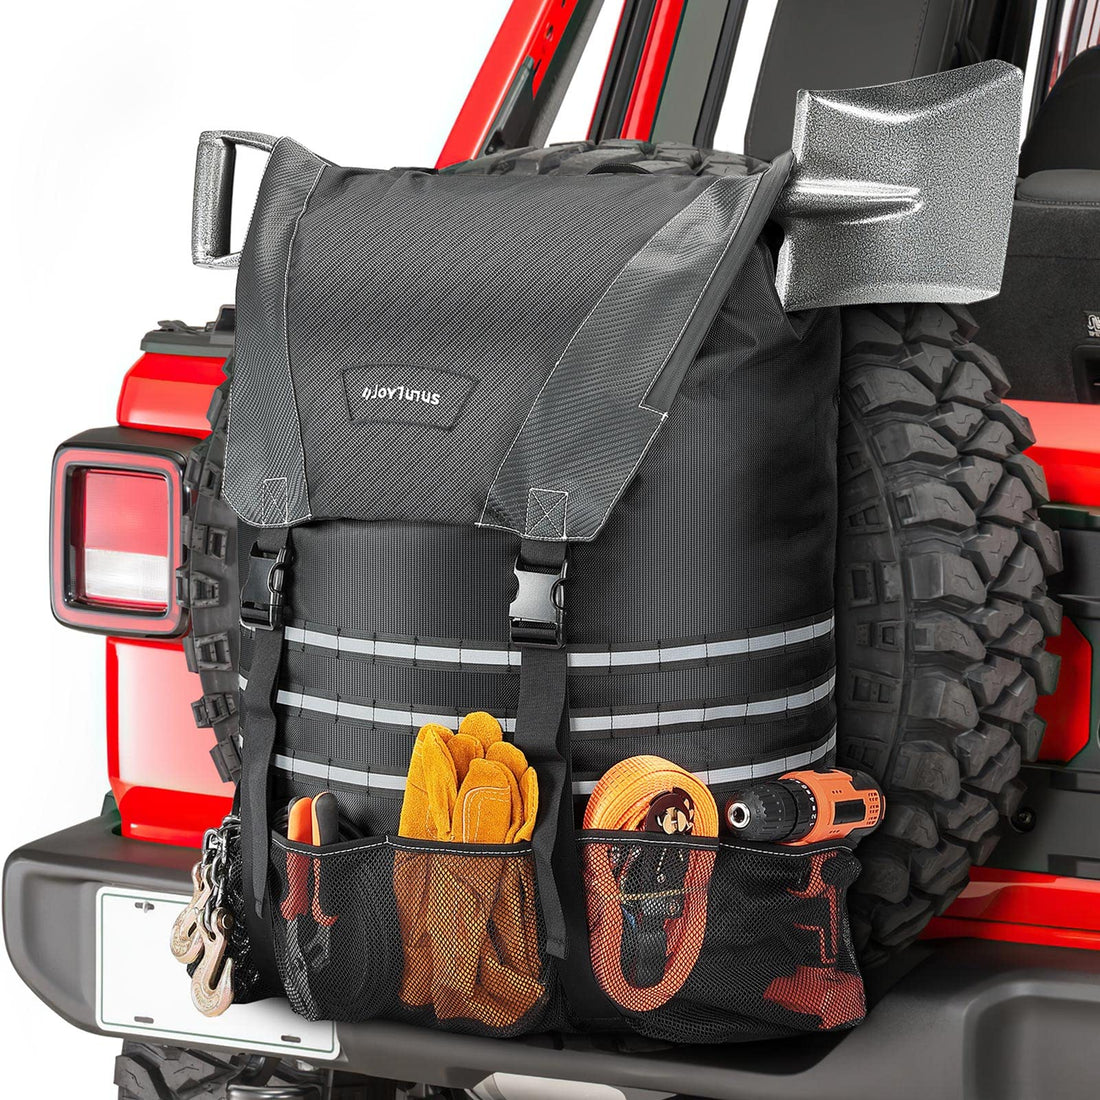 Upgraded Fits 40" Tire 31 Gallons Overland Series Larger Capacity Cargo Spare Tire Storage Bag for 4x4 Off-Road Camping Recovery Gear Firewood for Wrangler JK JKU JL